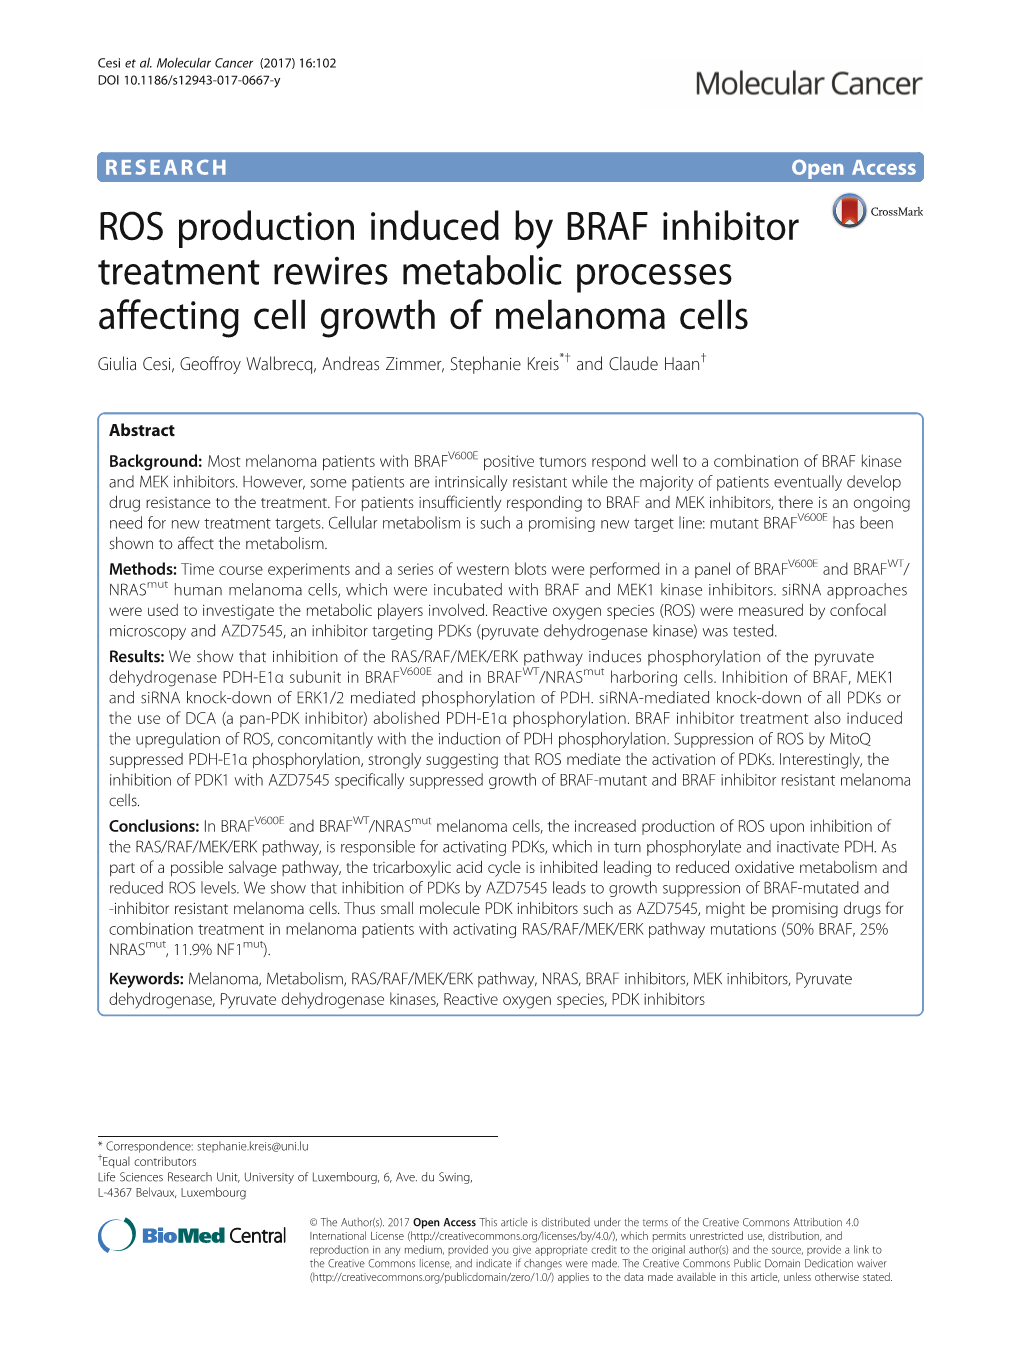 ROS Production Induced by BRAF Inhibitor Treatment Rewires